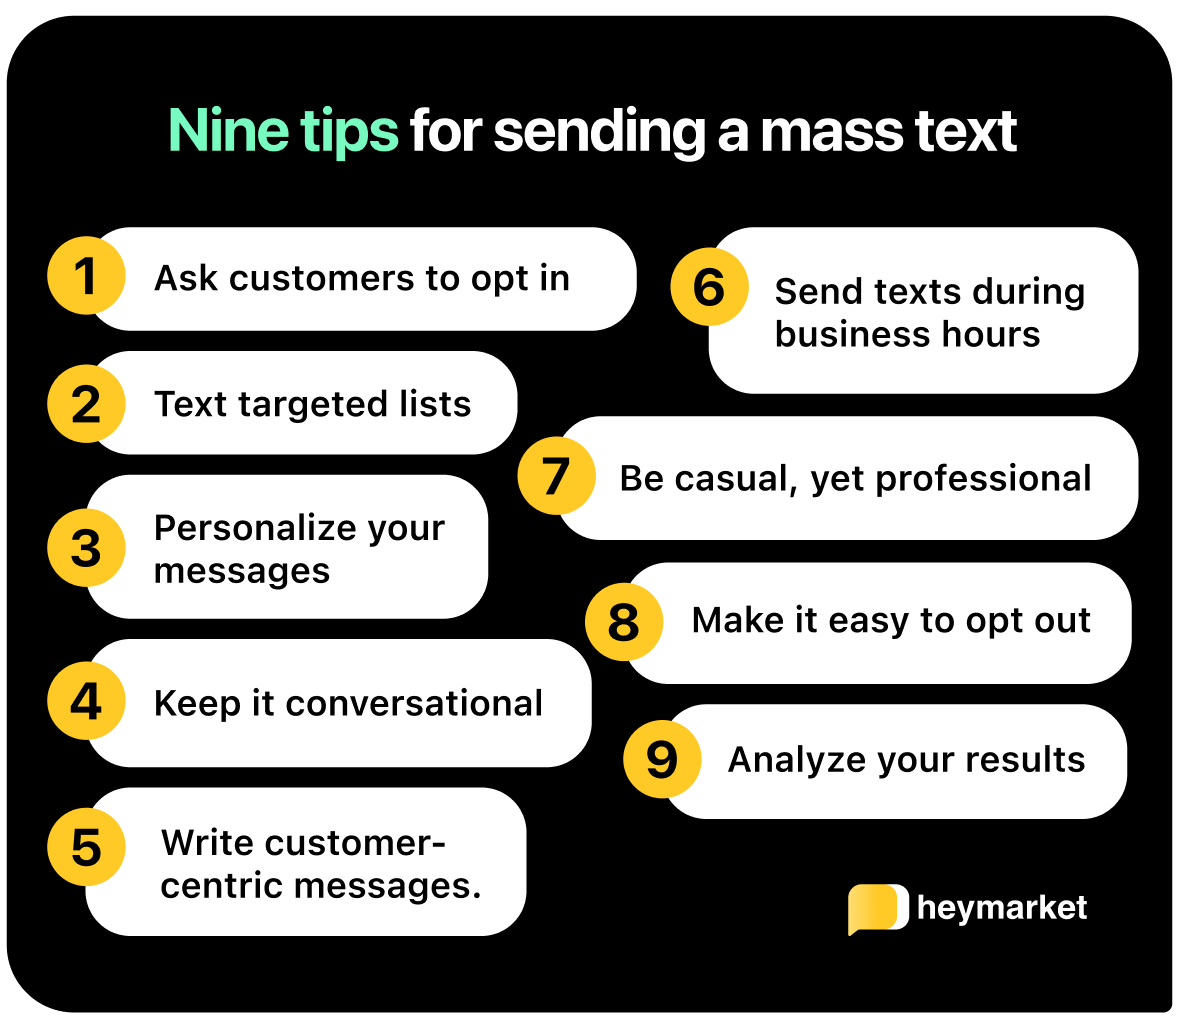 Tips for how to send a mass text